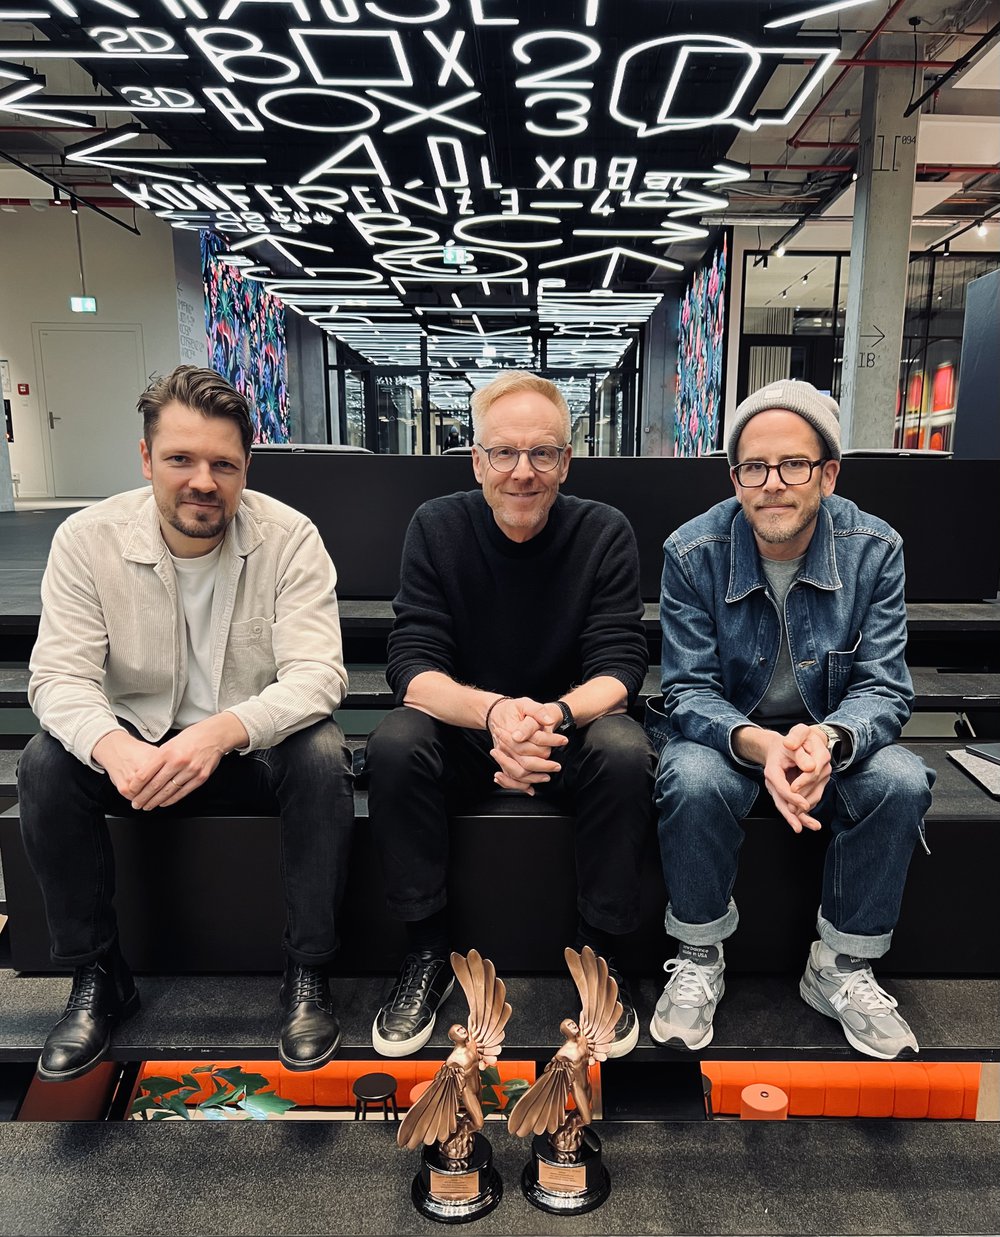 From left to right: Jörg Schmitt (Head of Design), Matthias Harbeck (Chief Creative Officer) & Christian Sommer (Managing Partner) from The New House of Communication-Team with their LIA awards!